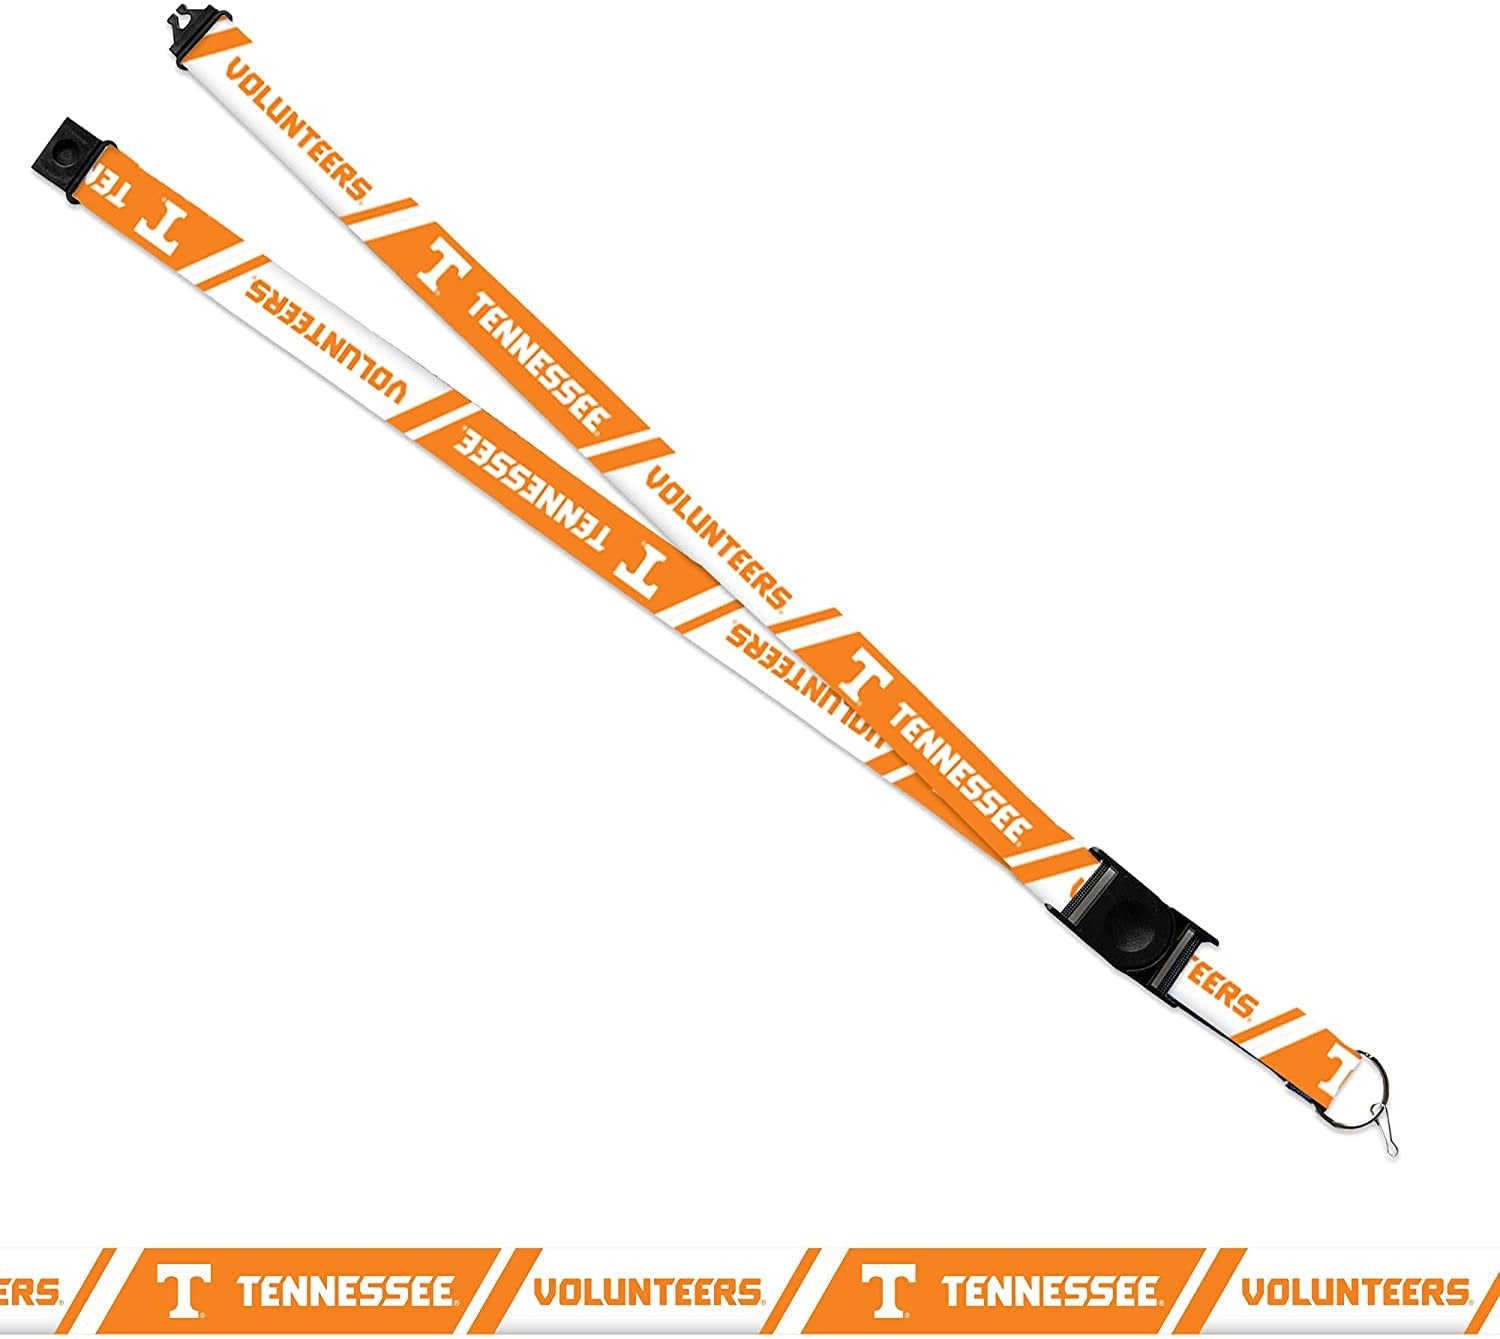 University of Tennessee Volunteers Lanyard Keychain Double Sided 18 Inch Button Clip Safety Breakaway